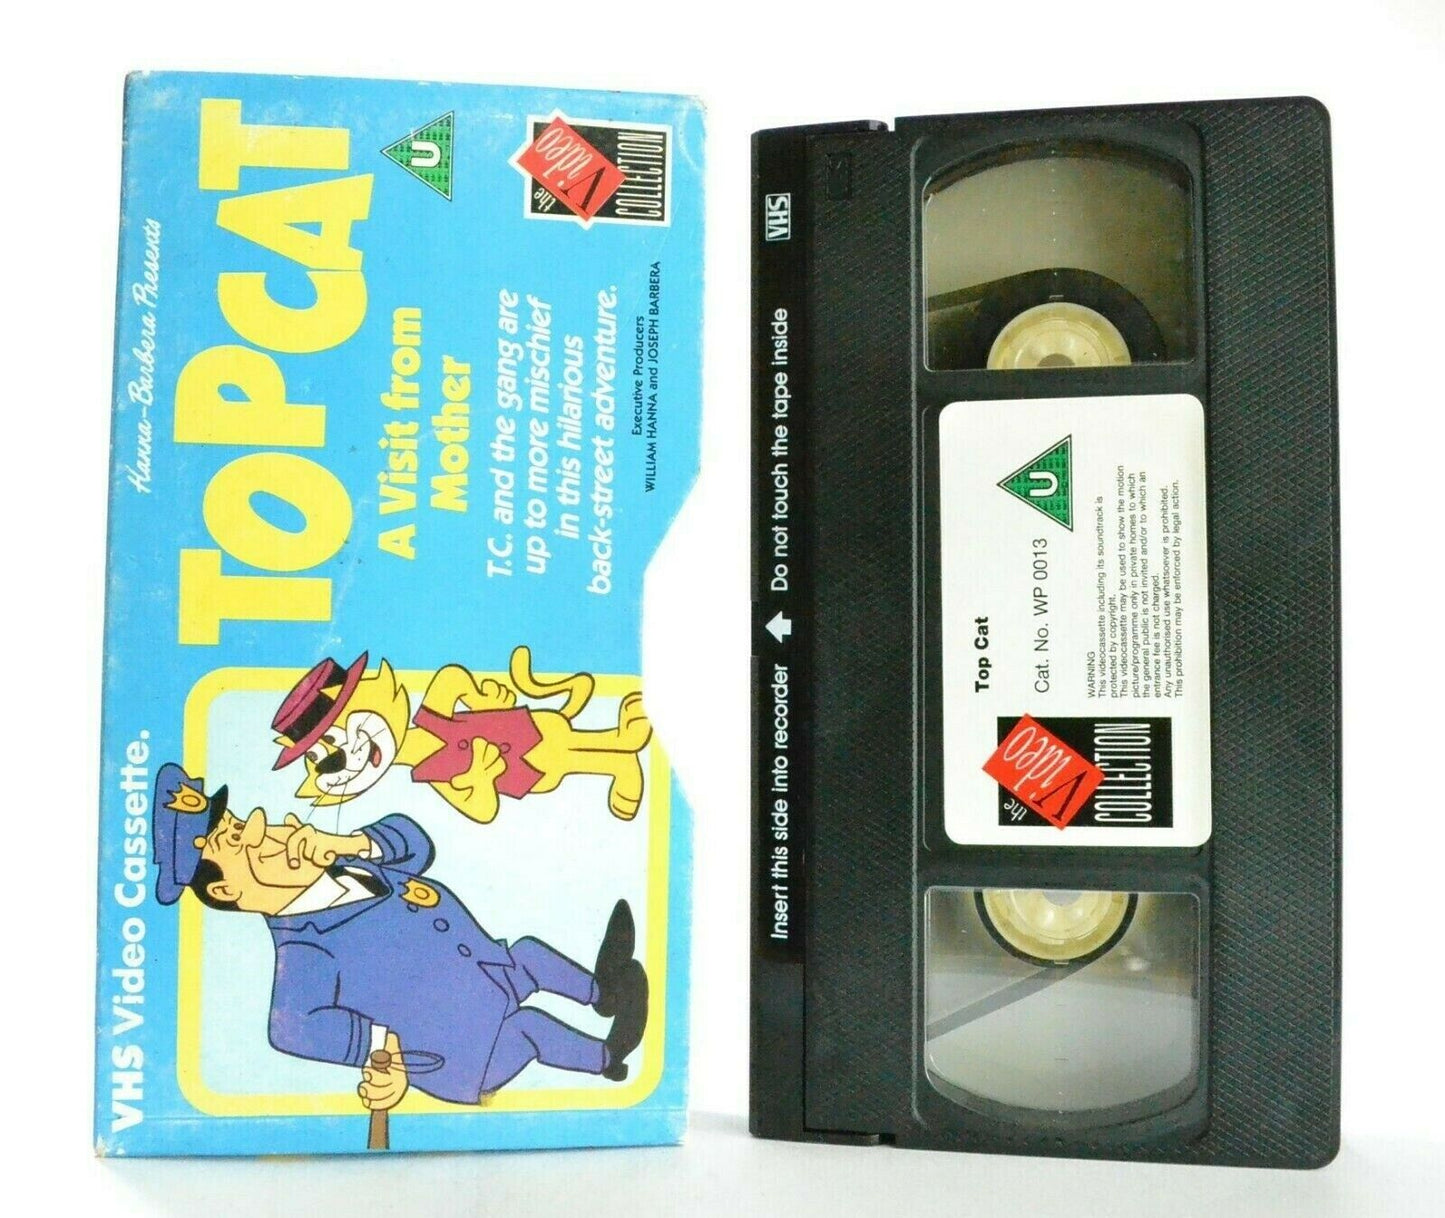 Top Cat: A Visit From Mother - Hanna-Barbera Classic - Carton Box - Kids - VHS-